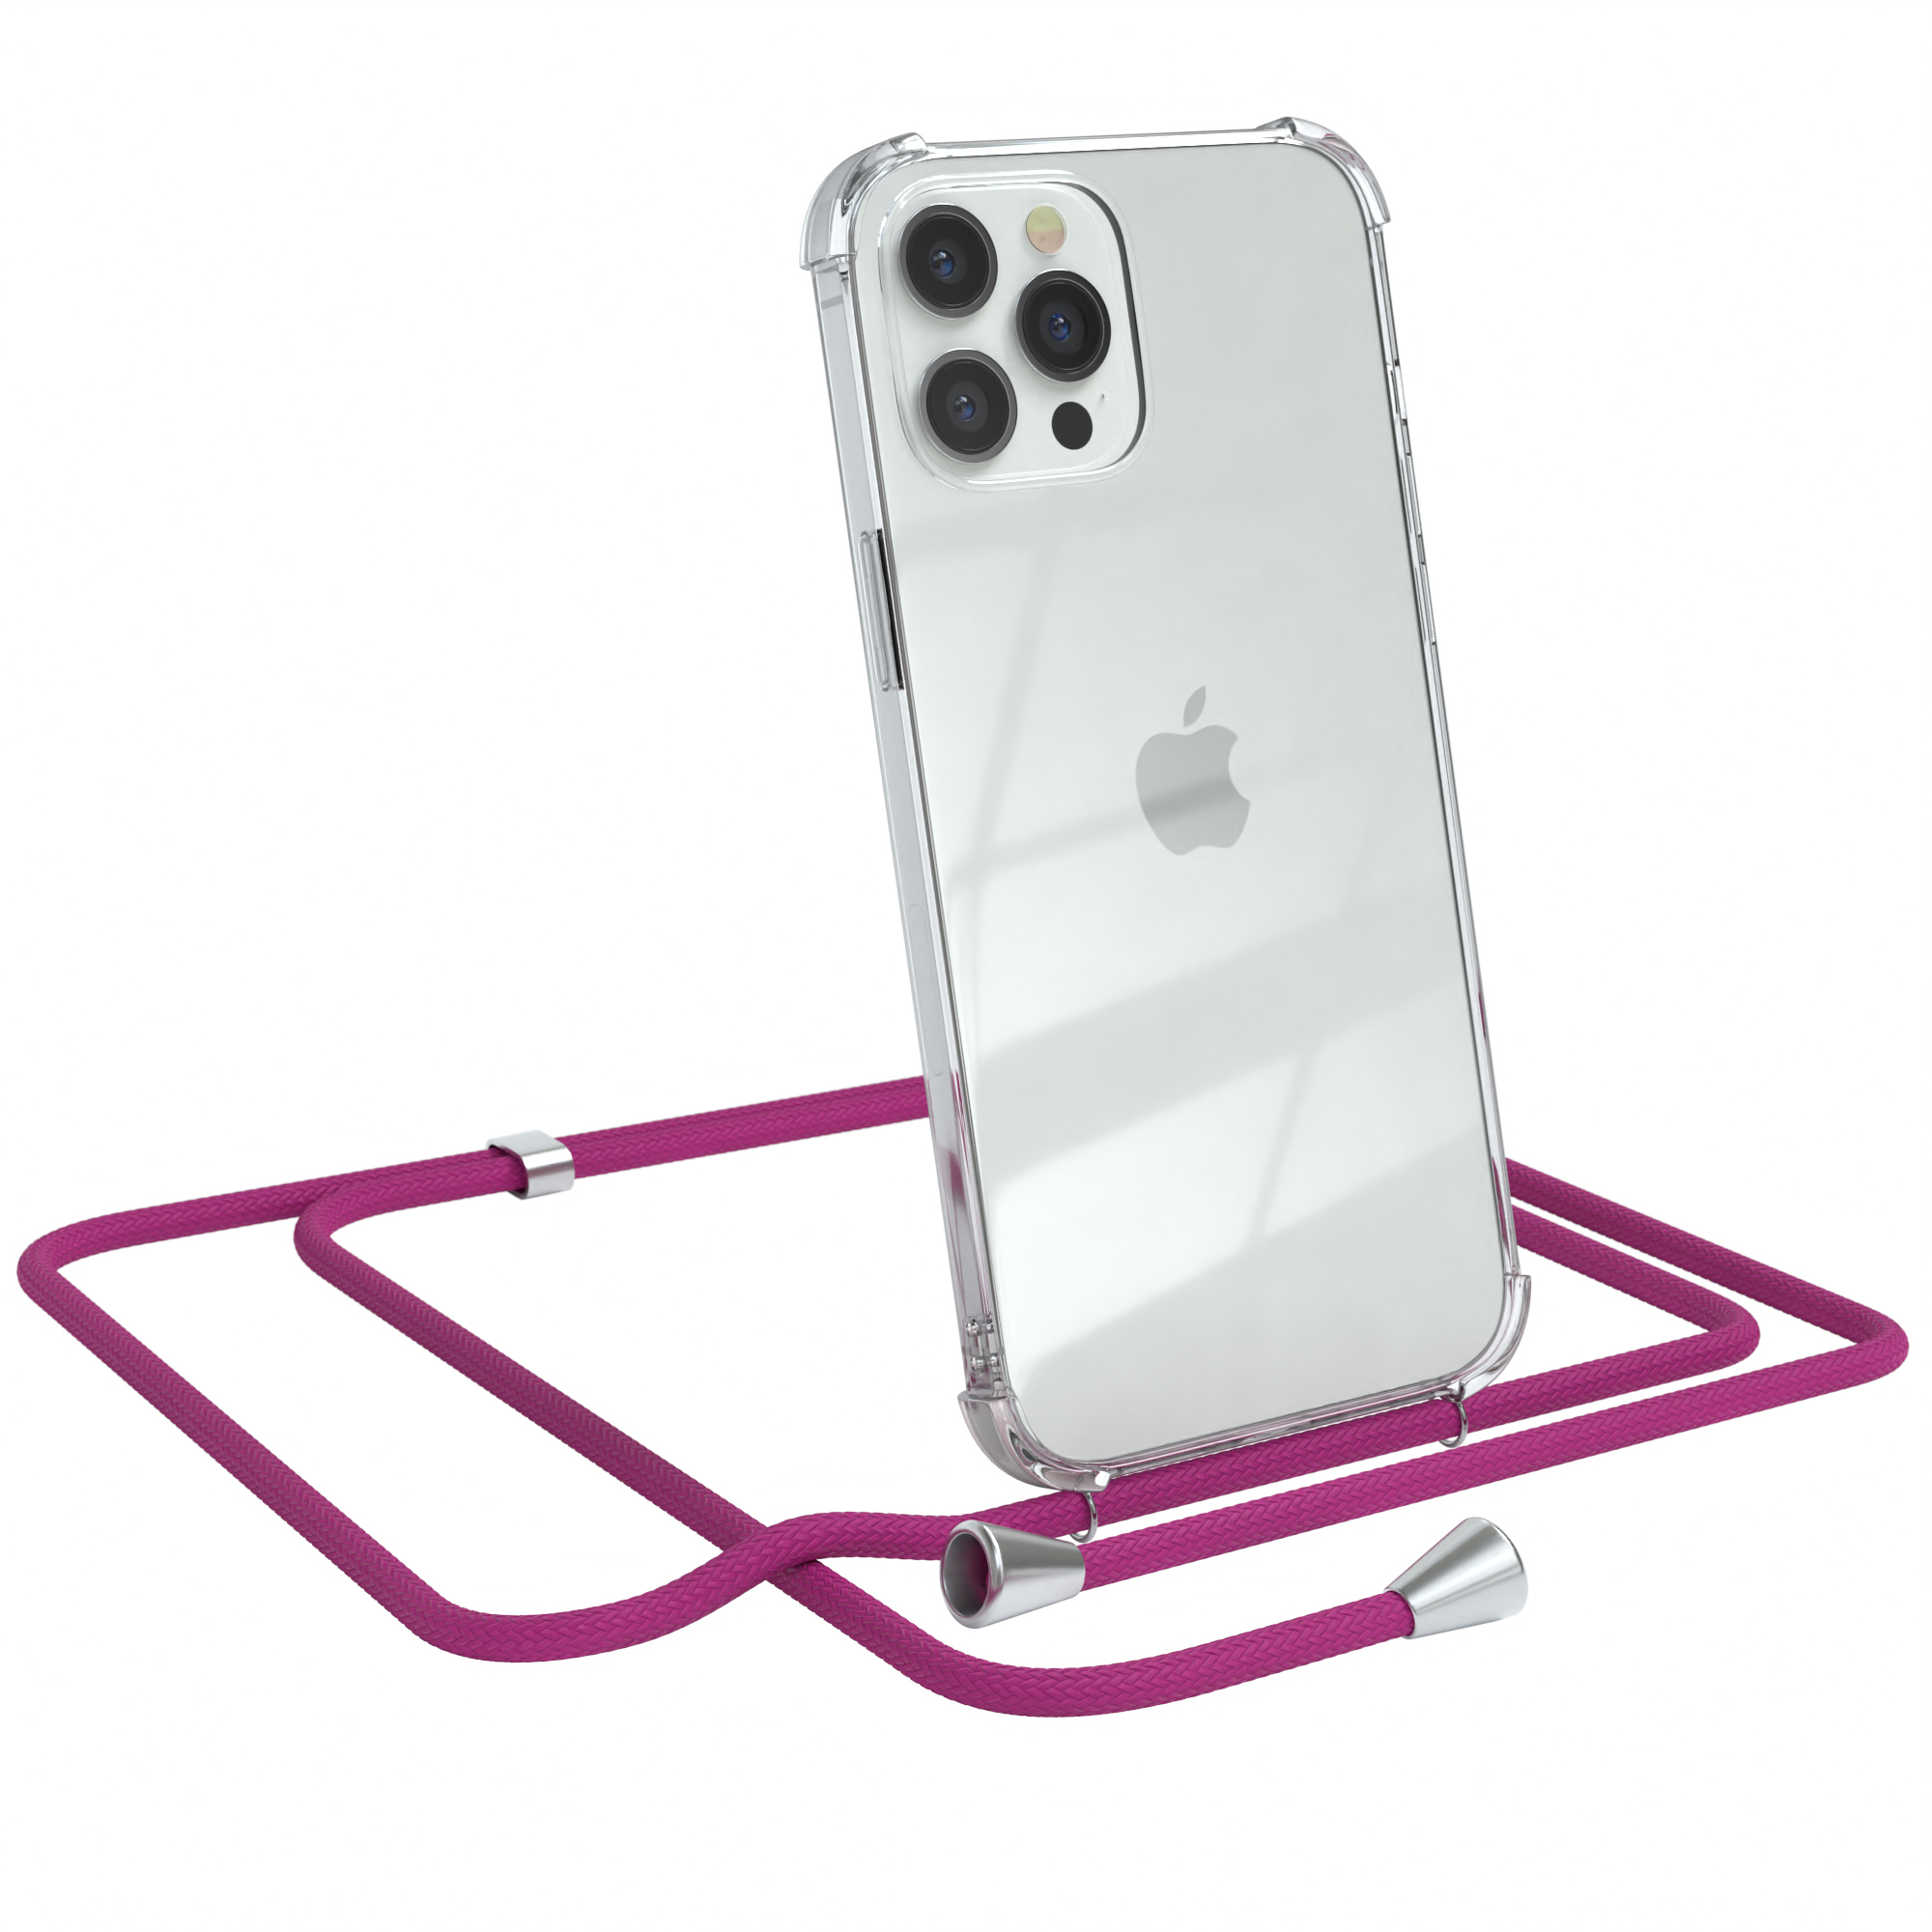 Silber Clips / Umhängetasche, EAZY Clear Pro Max, CASE iPhone Apple, Pink 12 mit Cover Umhängeband,